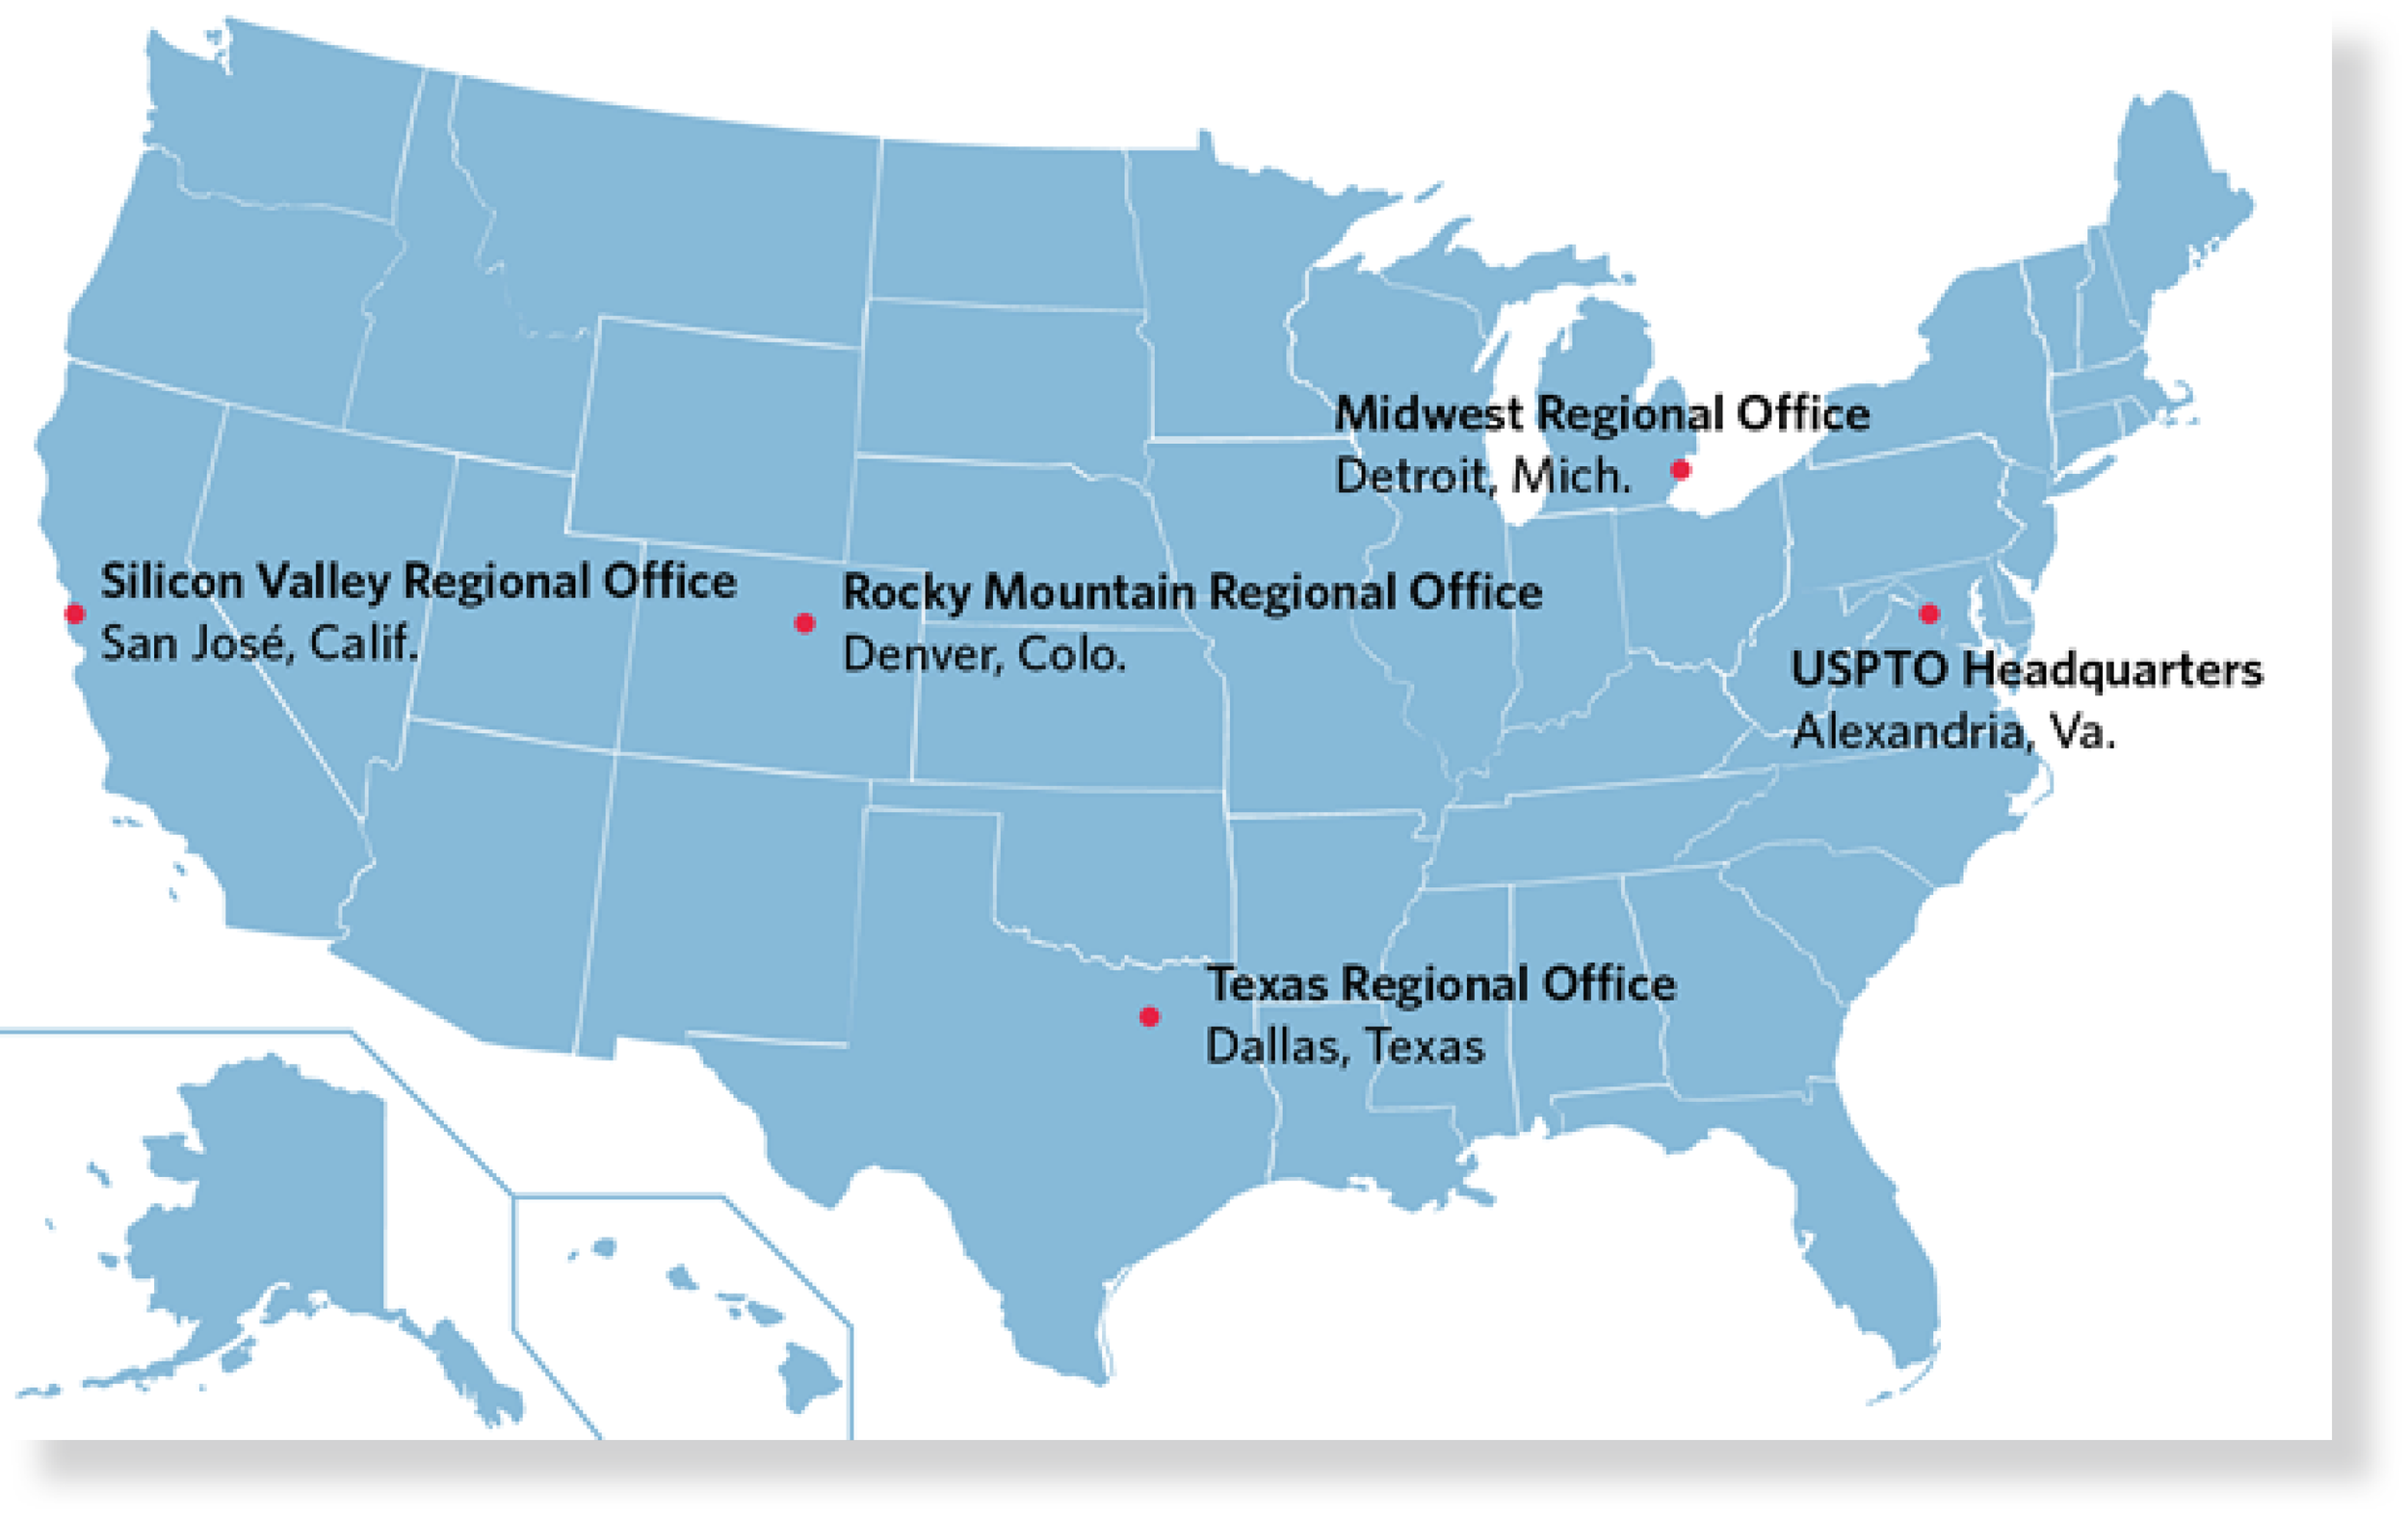 http://www.uspto.gov/about-us/uspto-office-locations